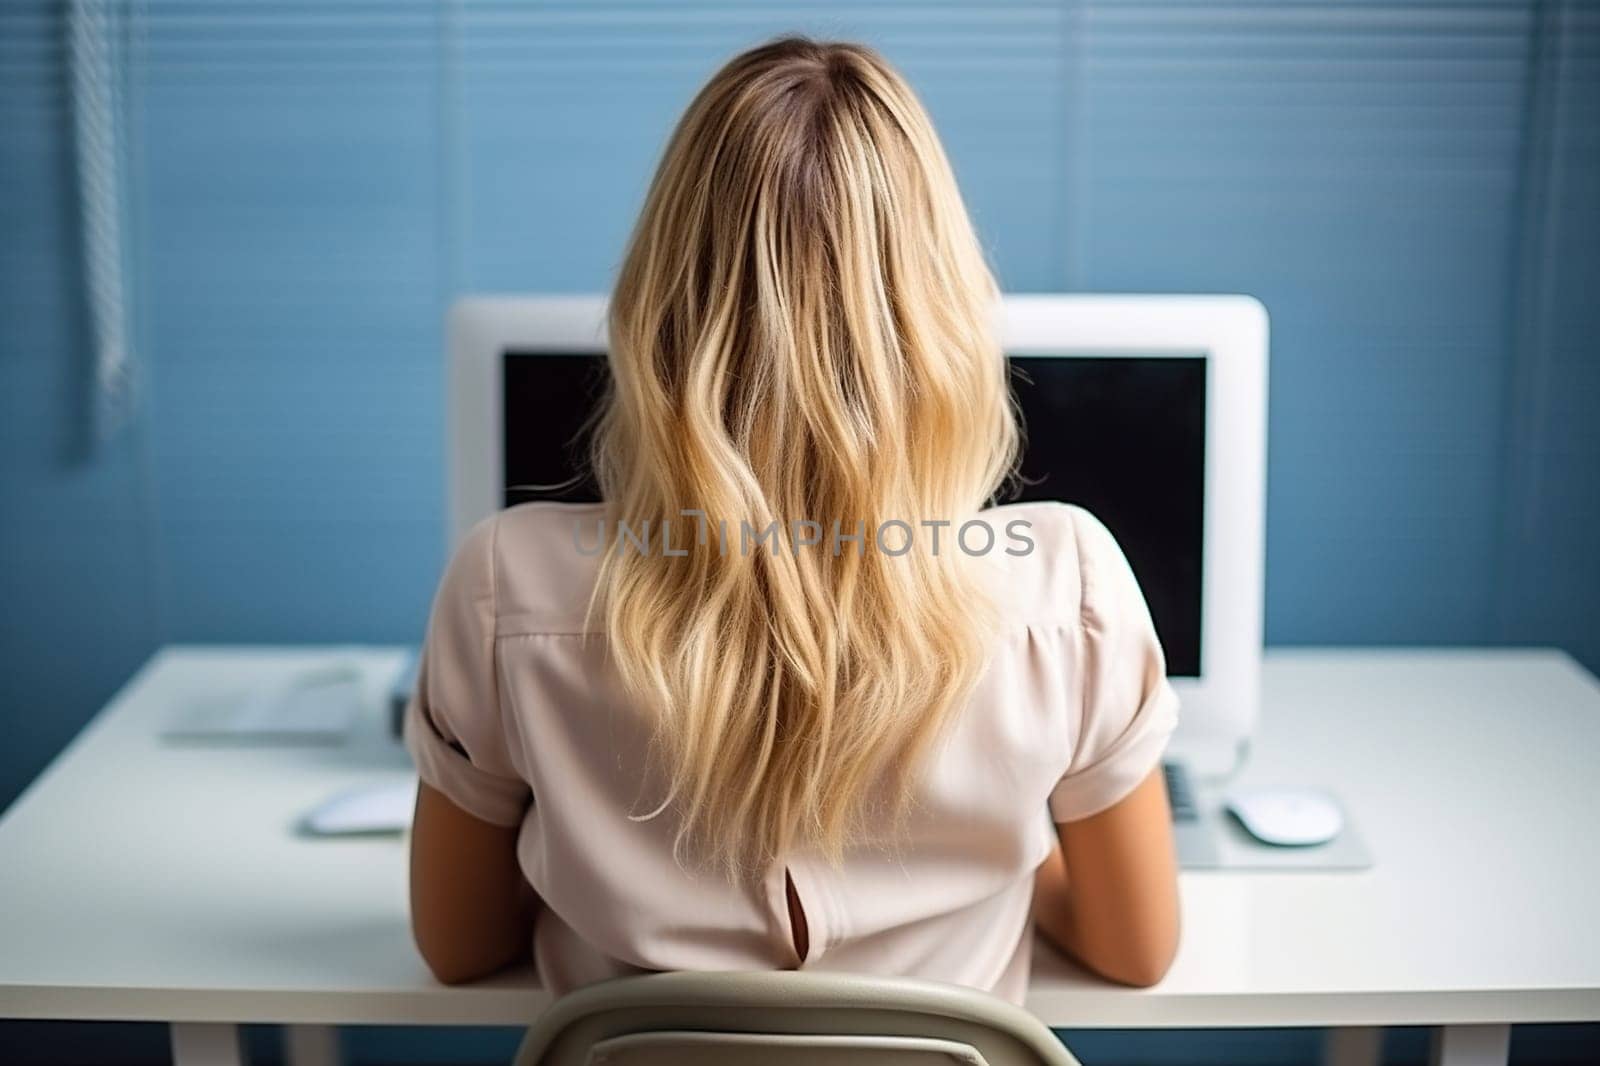 Business woman in light clothes typing on a laptop at the workplace. Woman working on a keyboard in the office. Generated by artificial intelligence by Vovmar